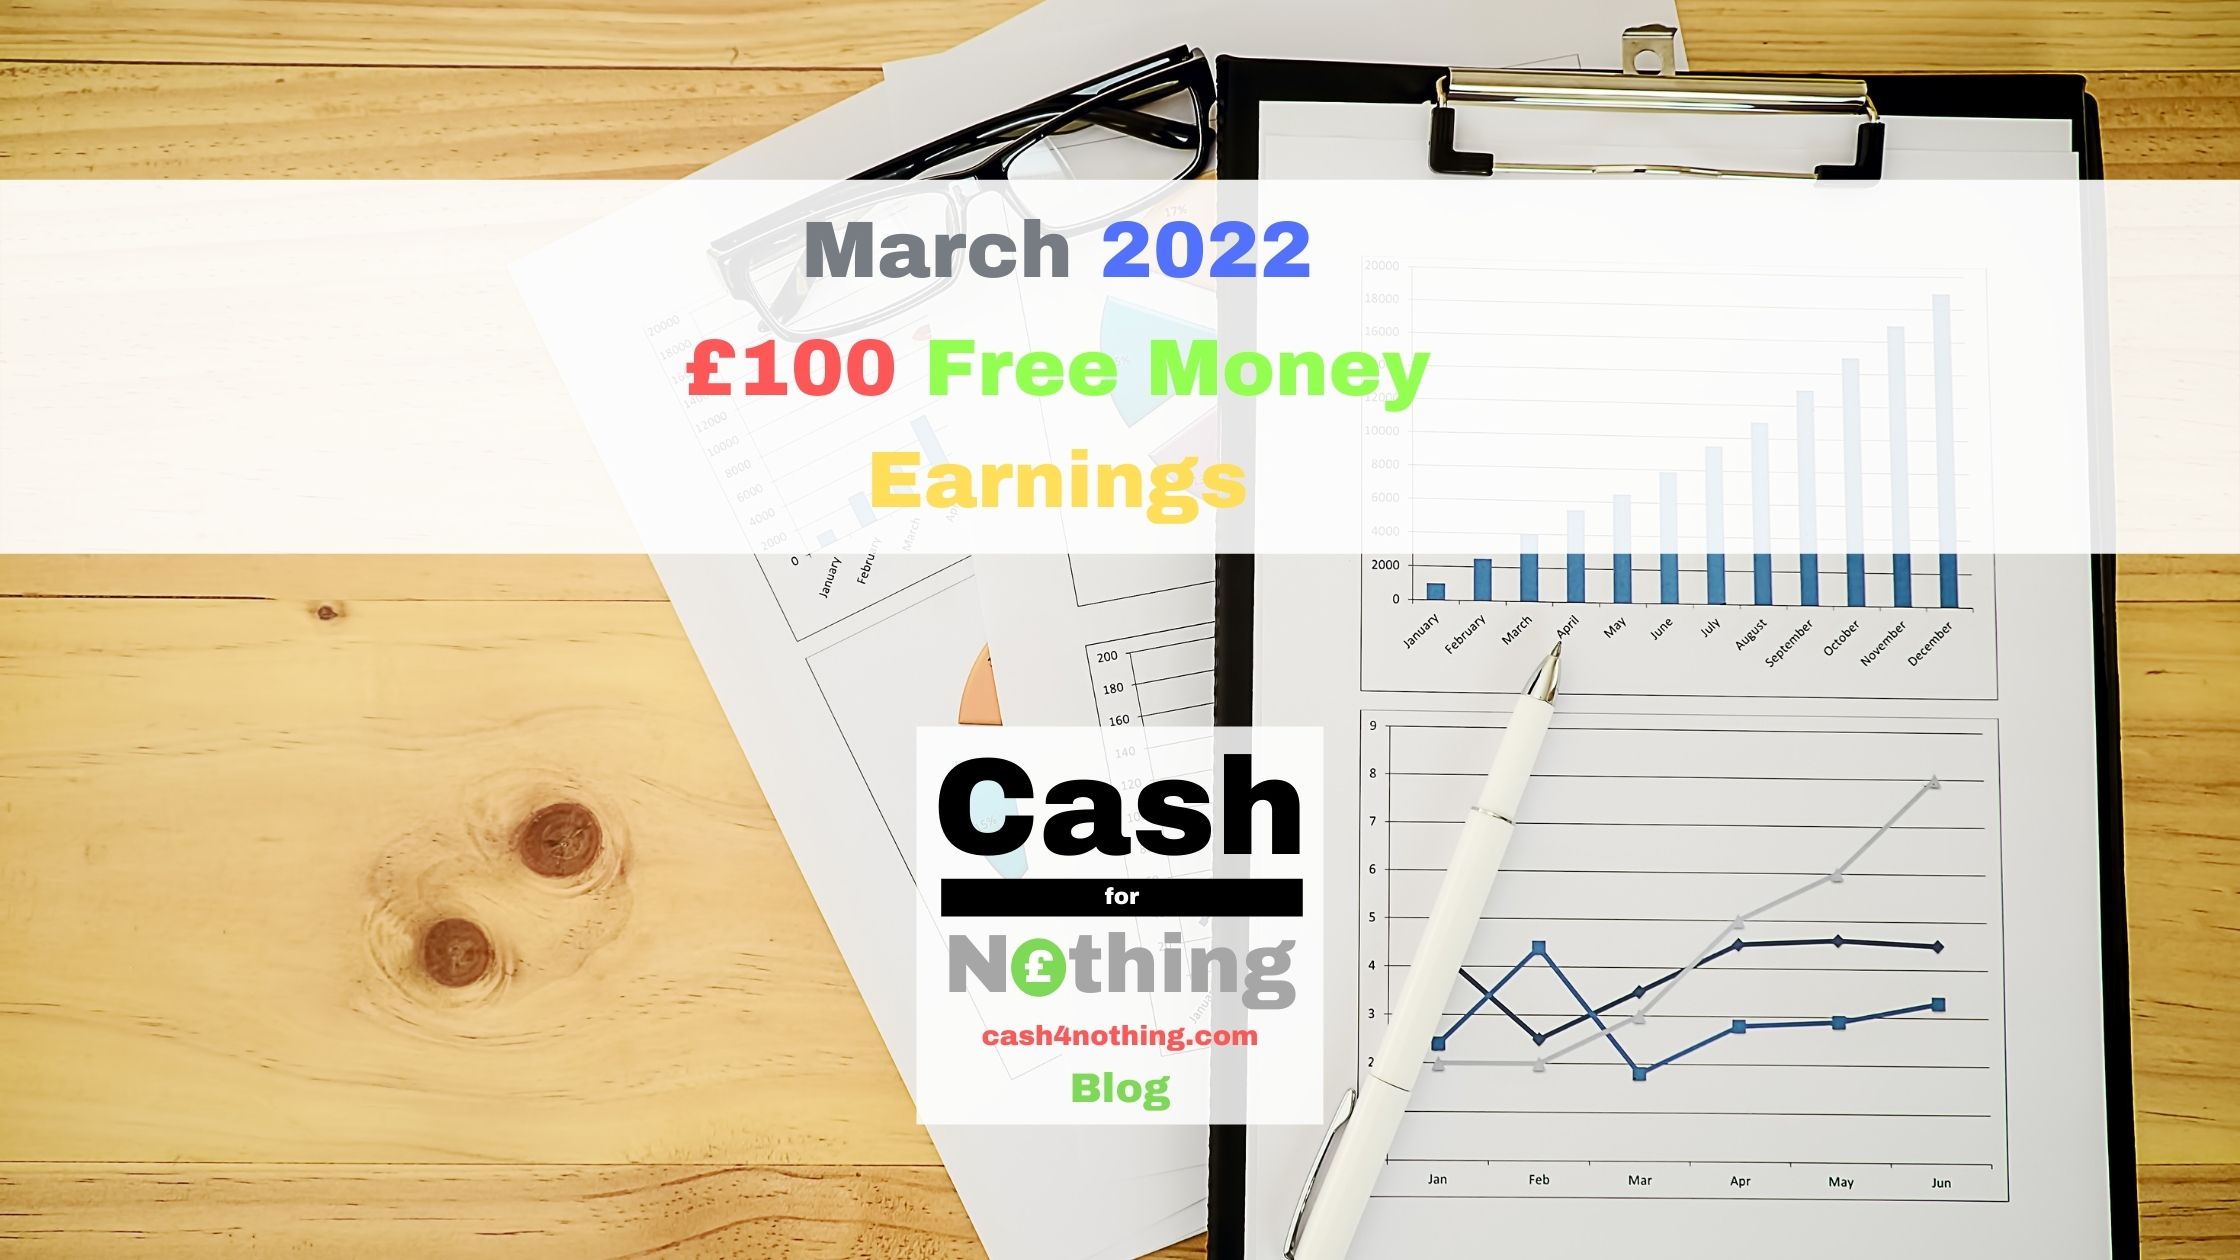 Cash4Nothing March 2022 Free Money Earnings